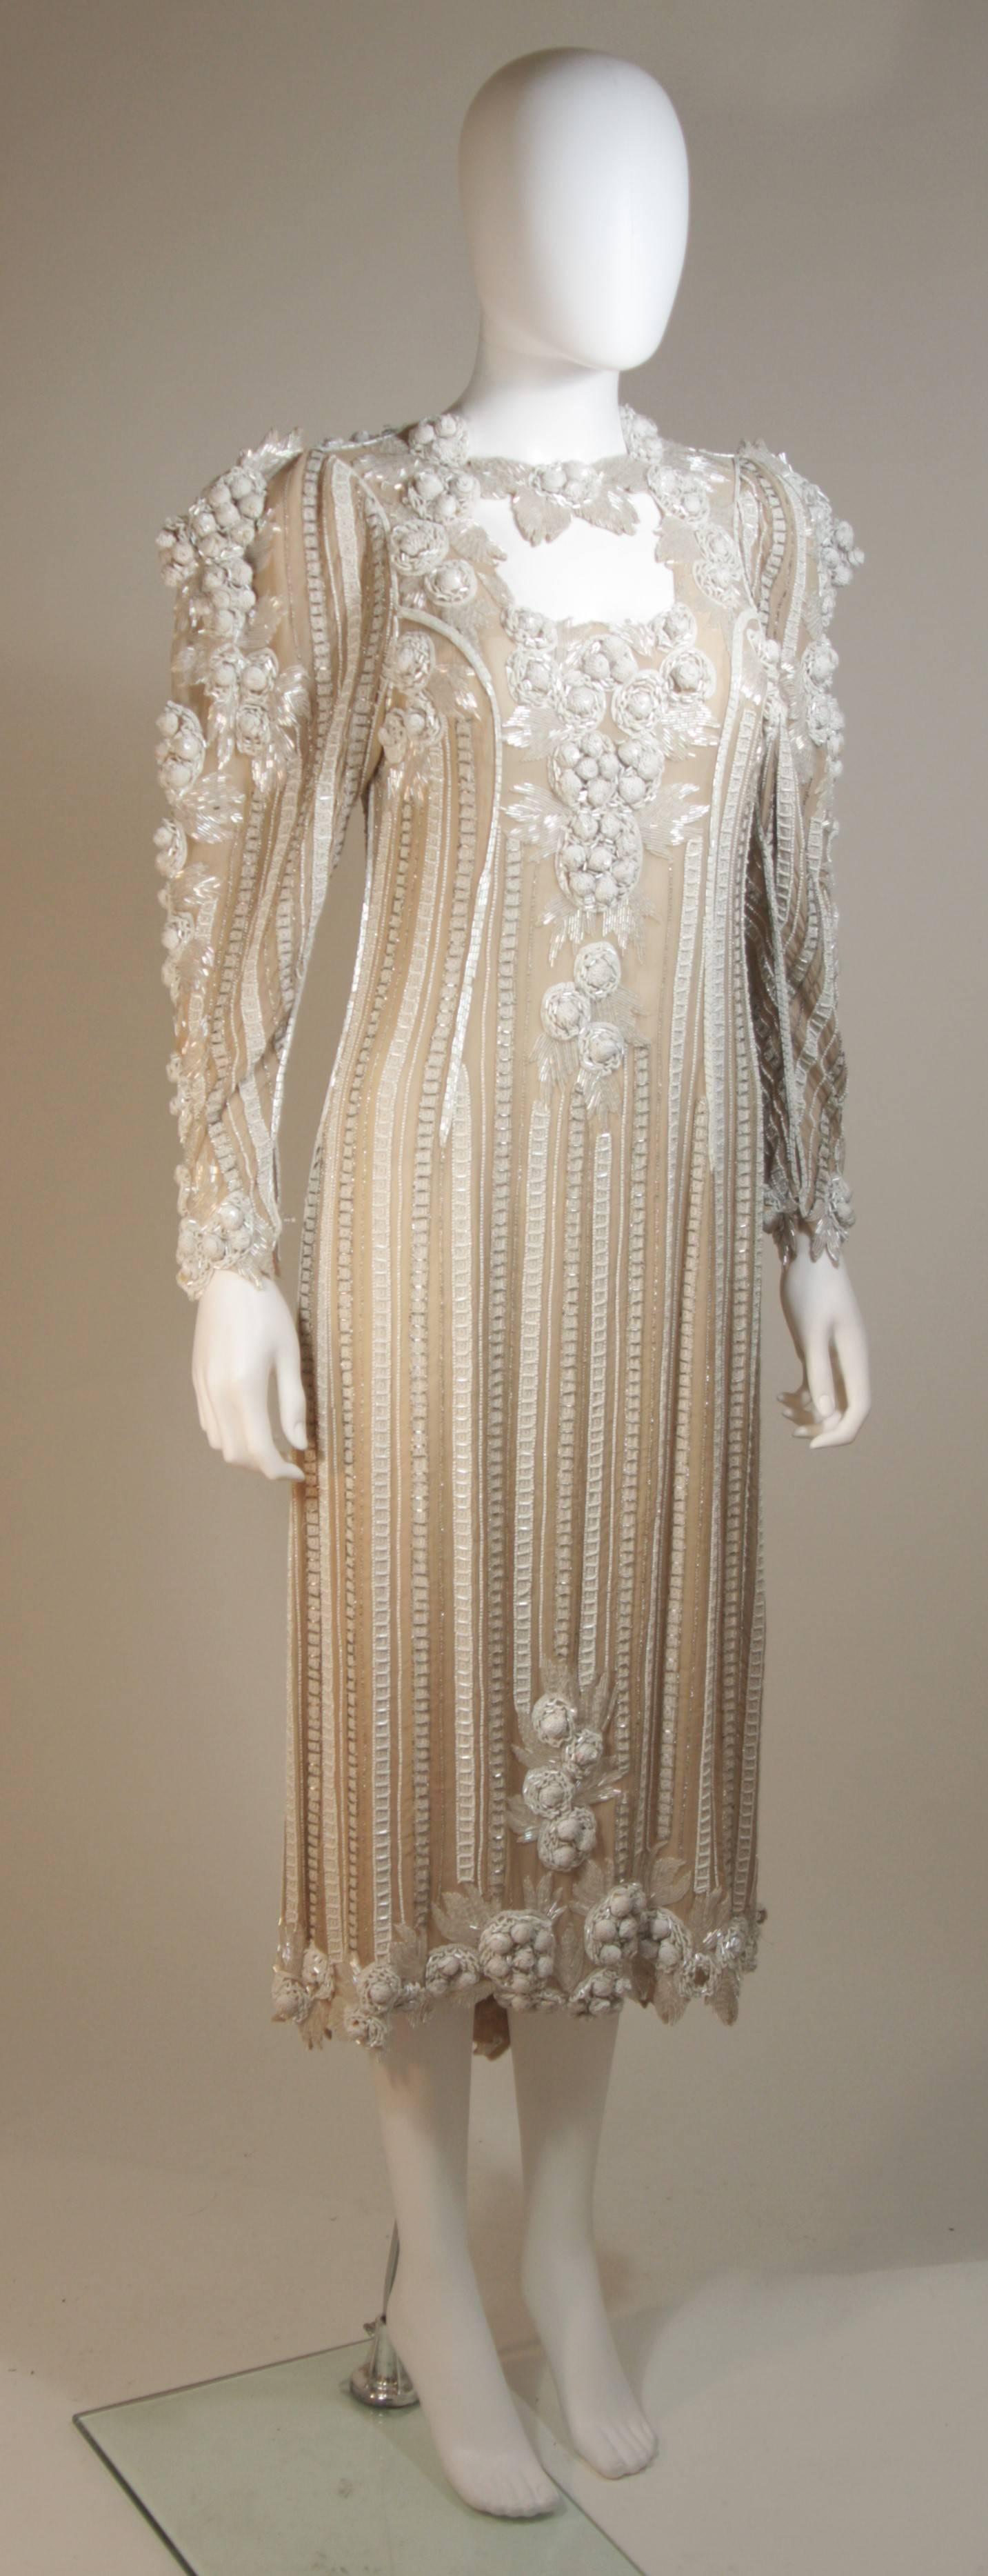 APROPOS 1980's Ivory Beaded Gown with Shoulder Accents Size 6-8 In Excellent Condition For Sale In Los Angeles, CA